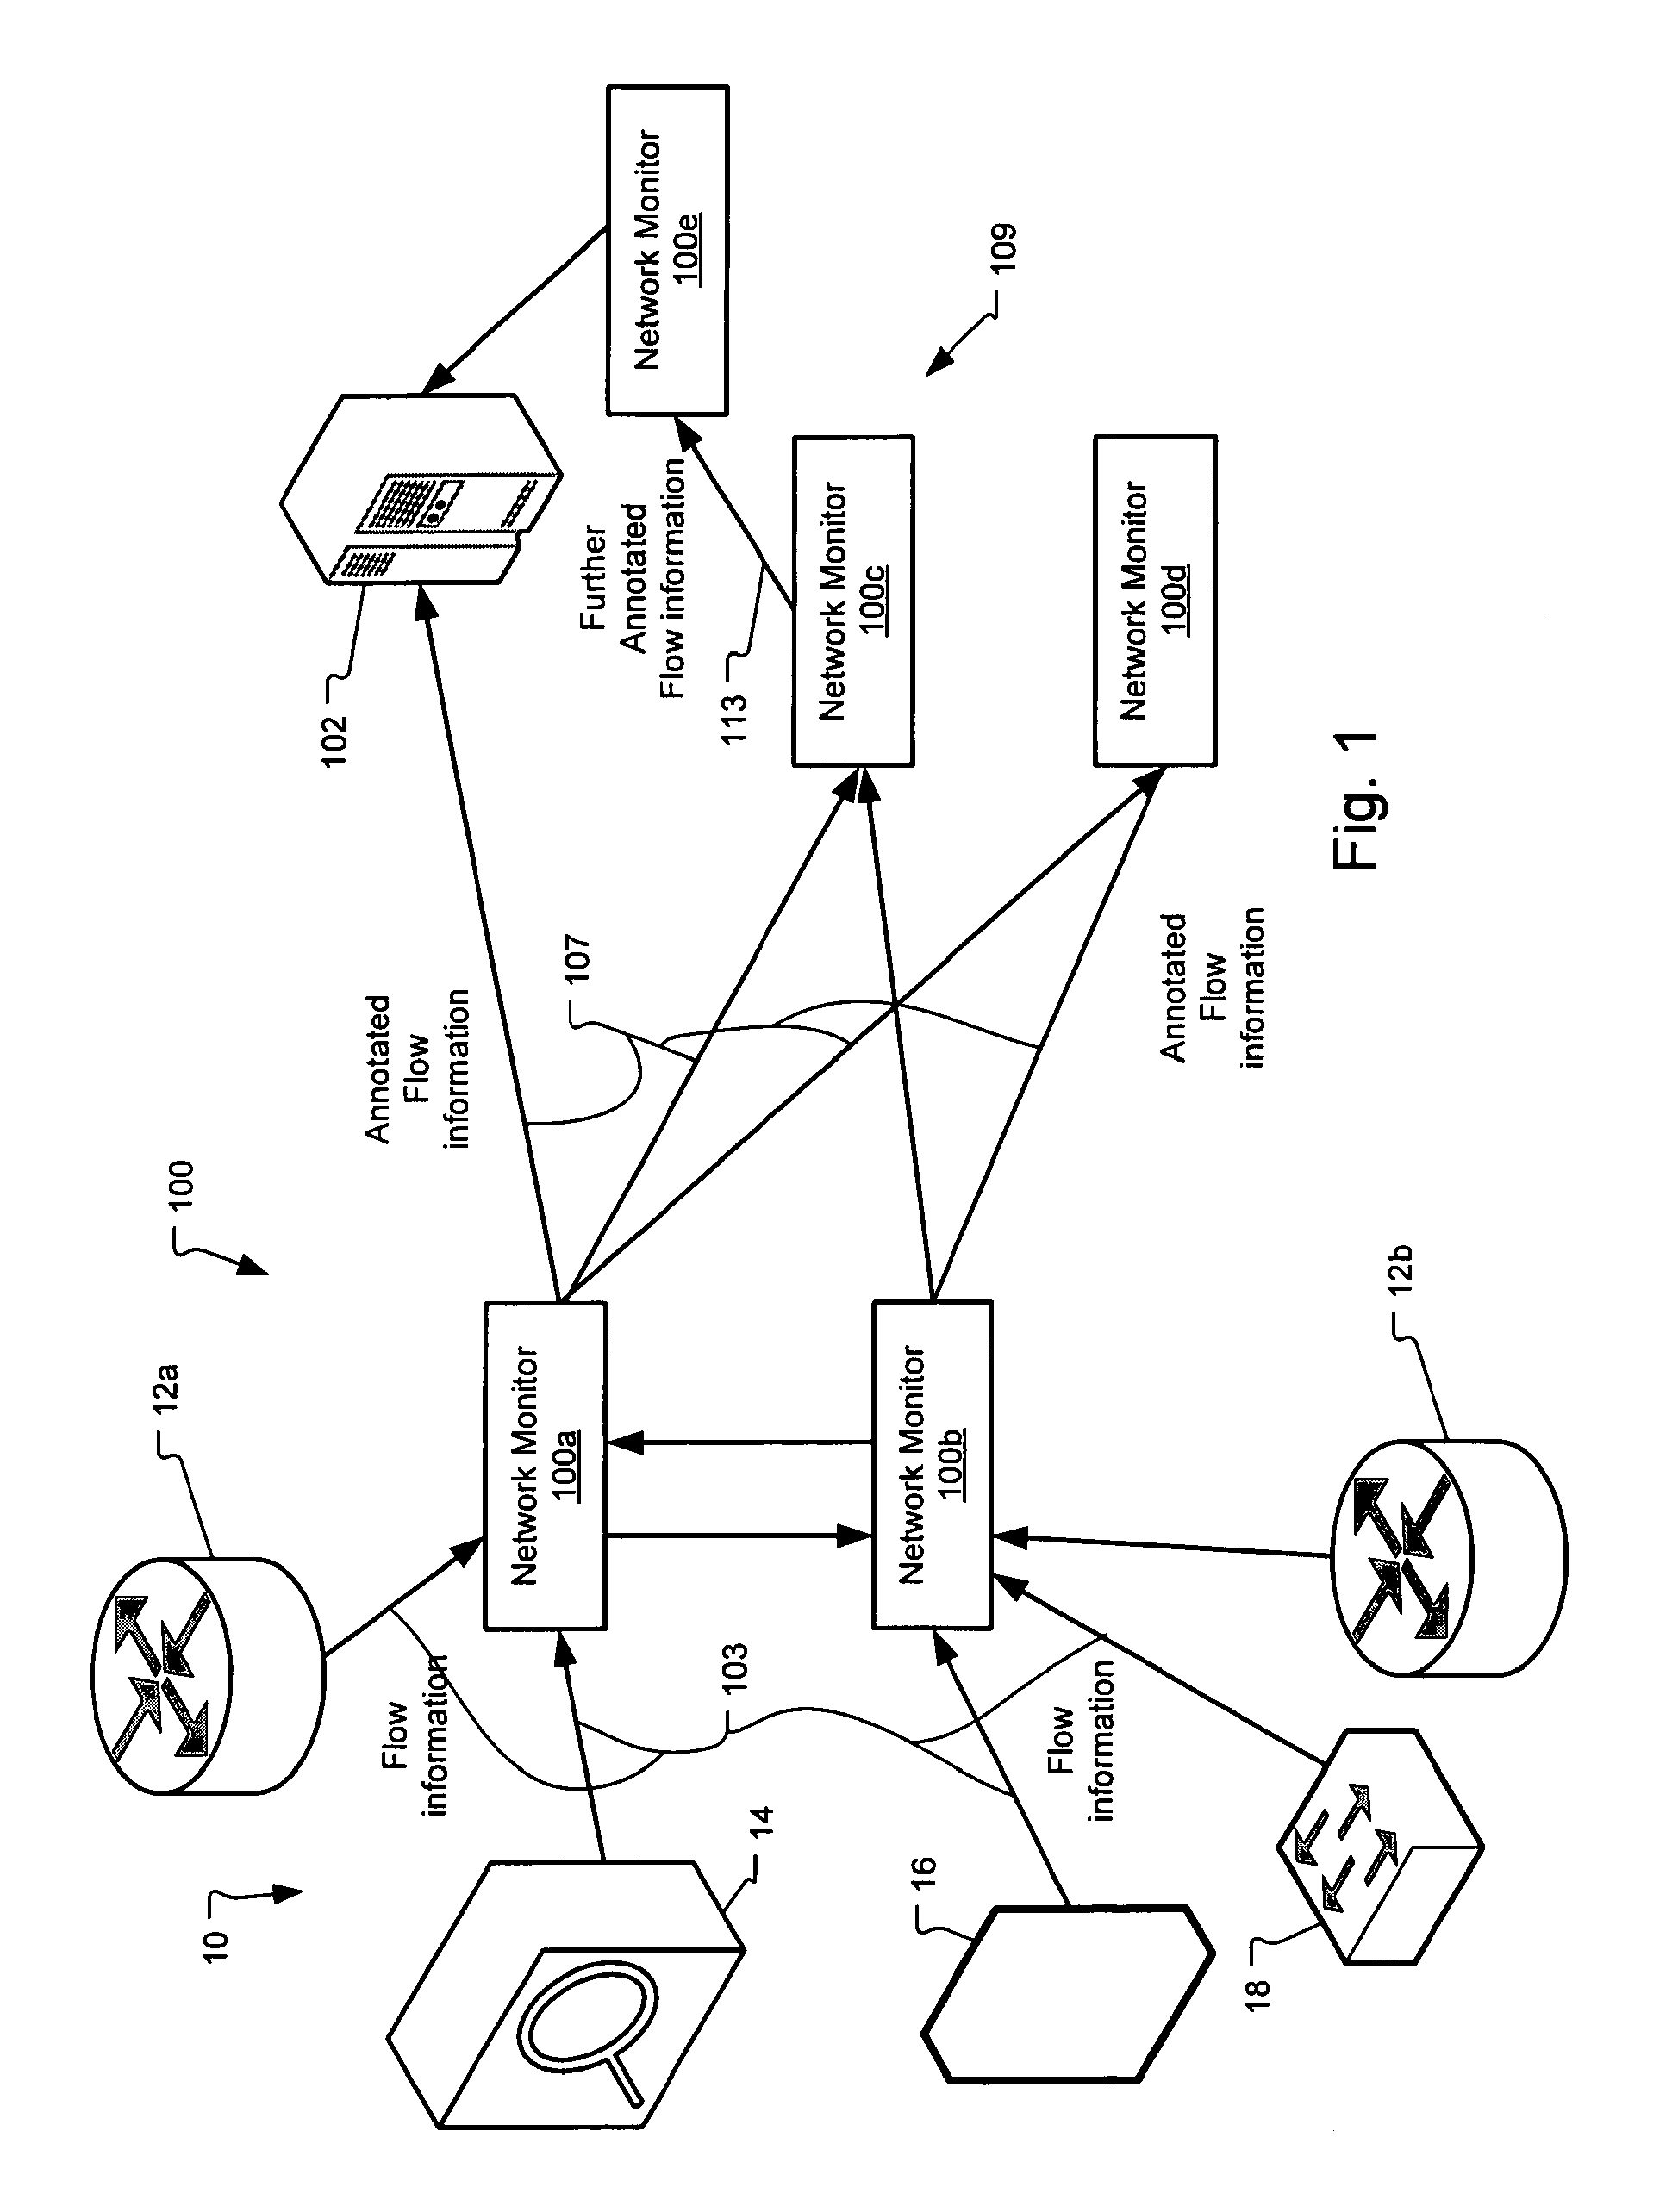 Method and system for annotating network flow information